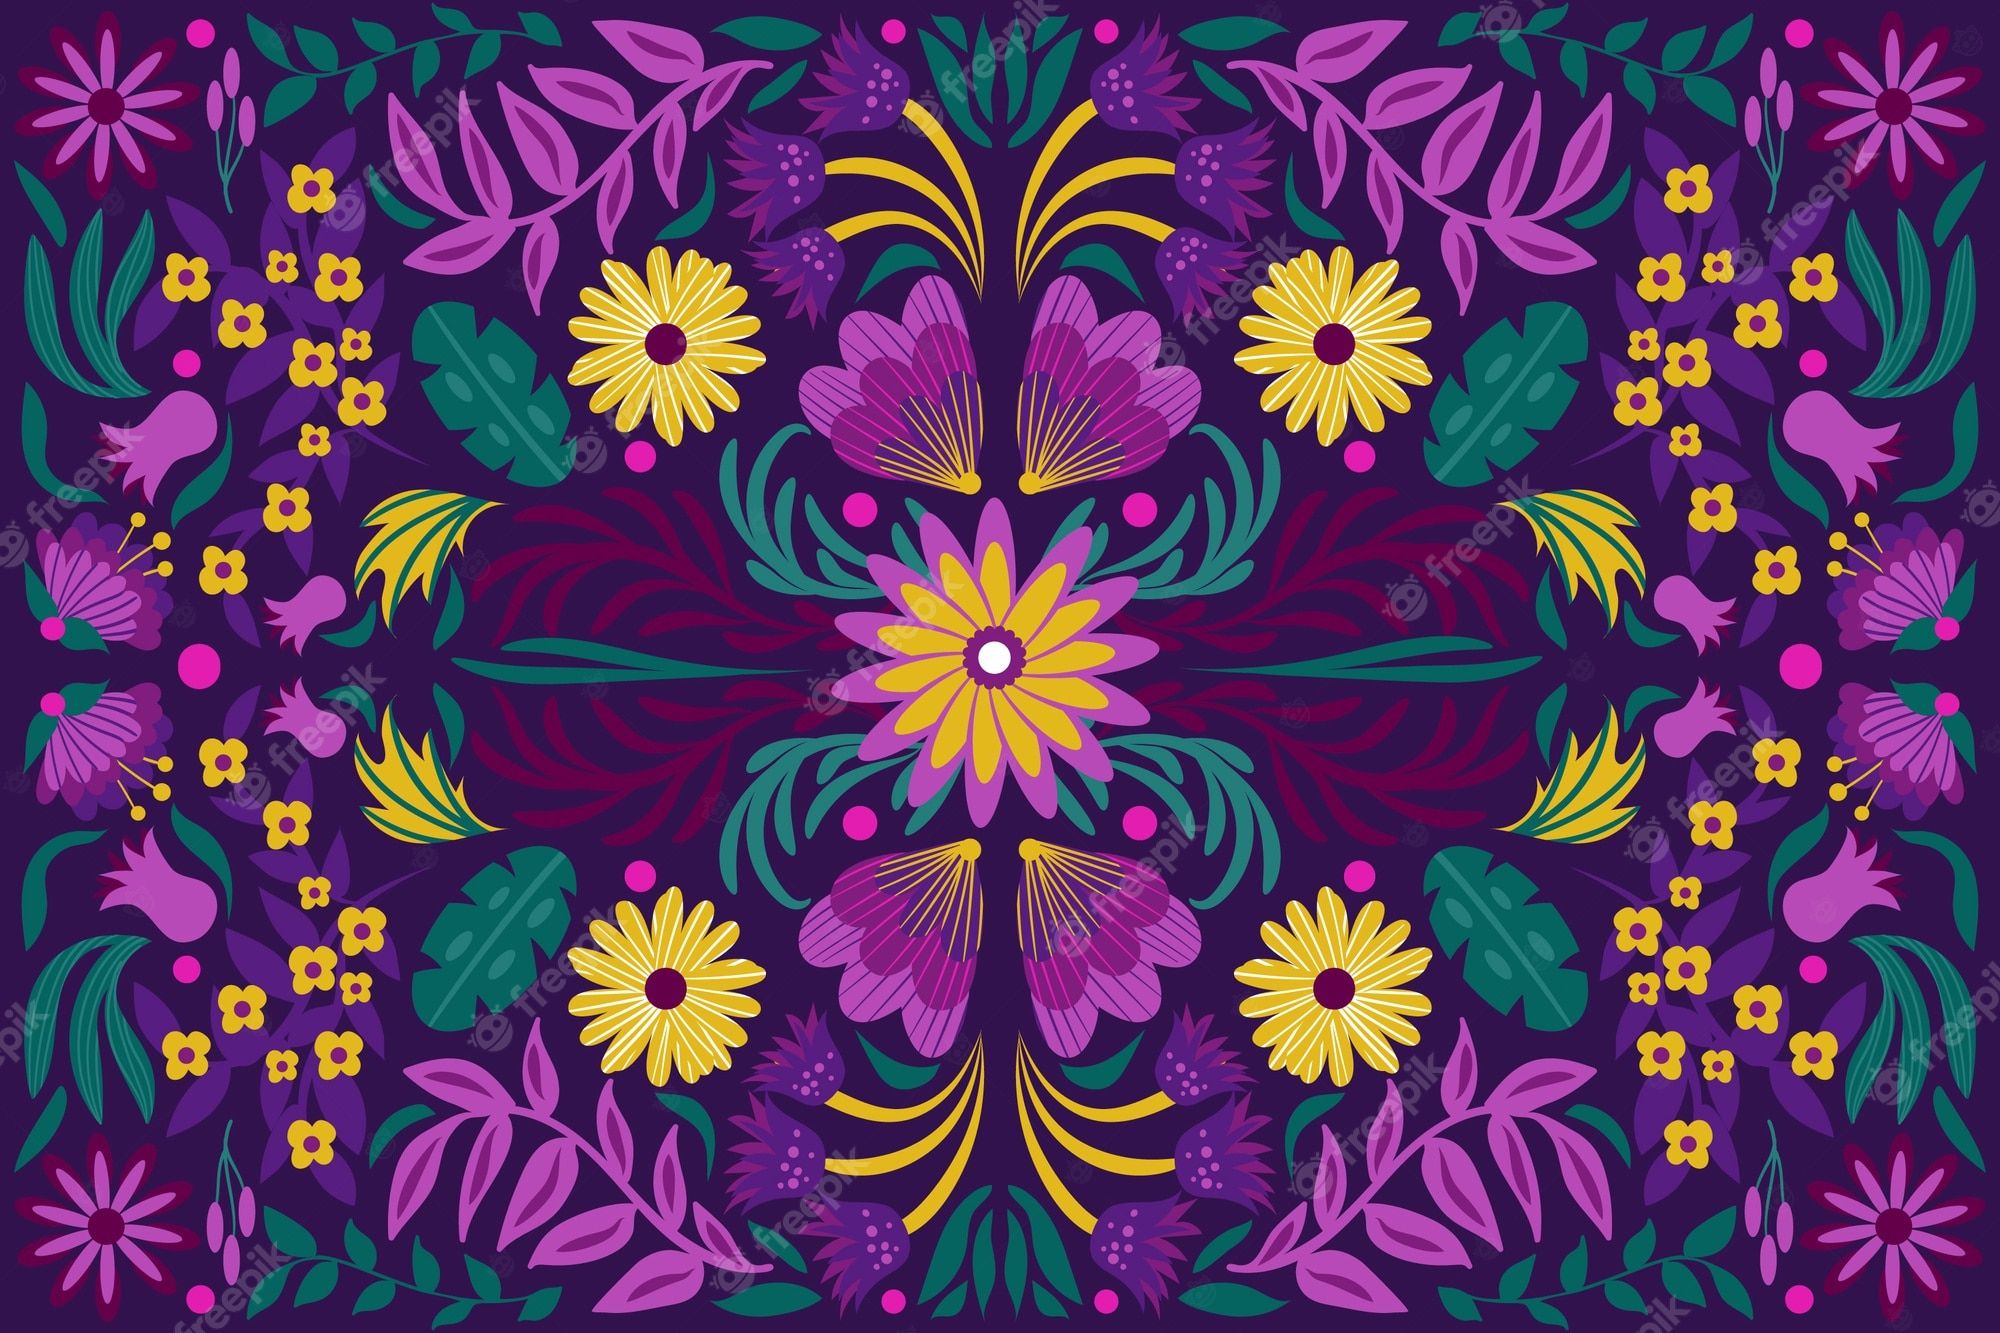 A colorful floral pattern with purple, yellow, and green flowers on a dark purple background. - Mexico